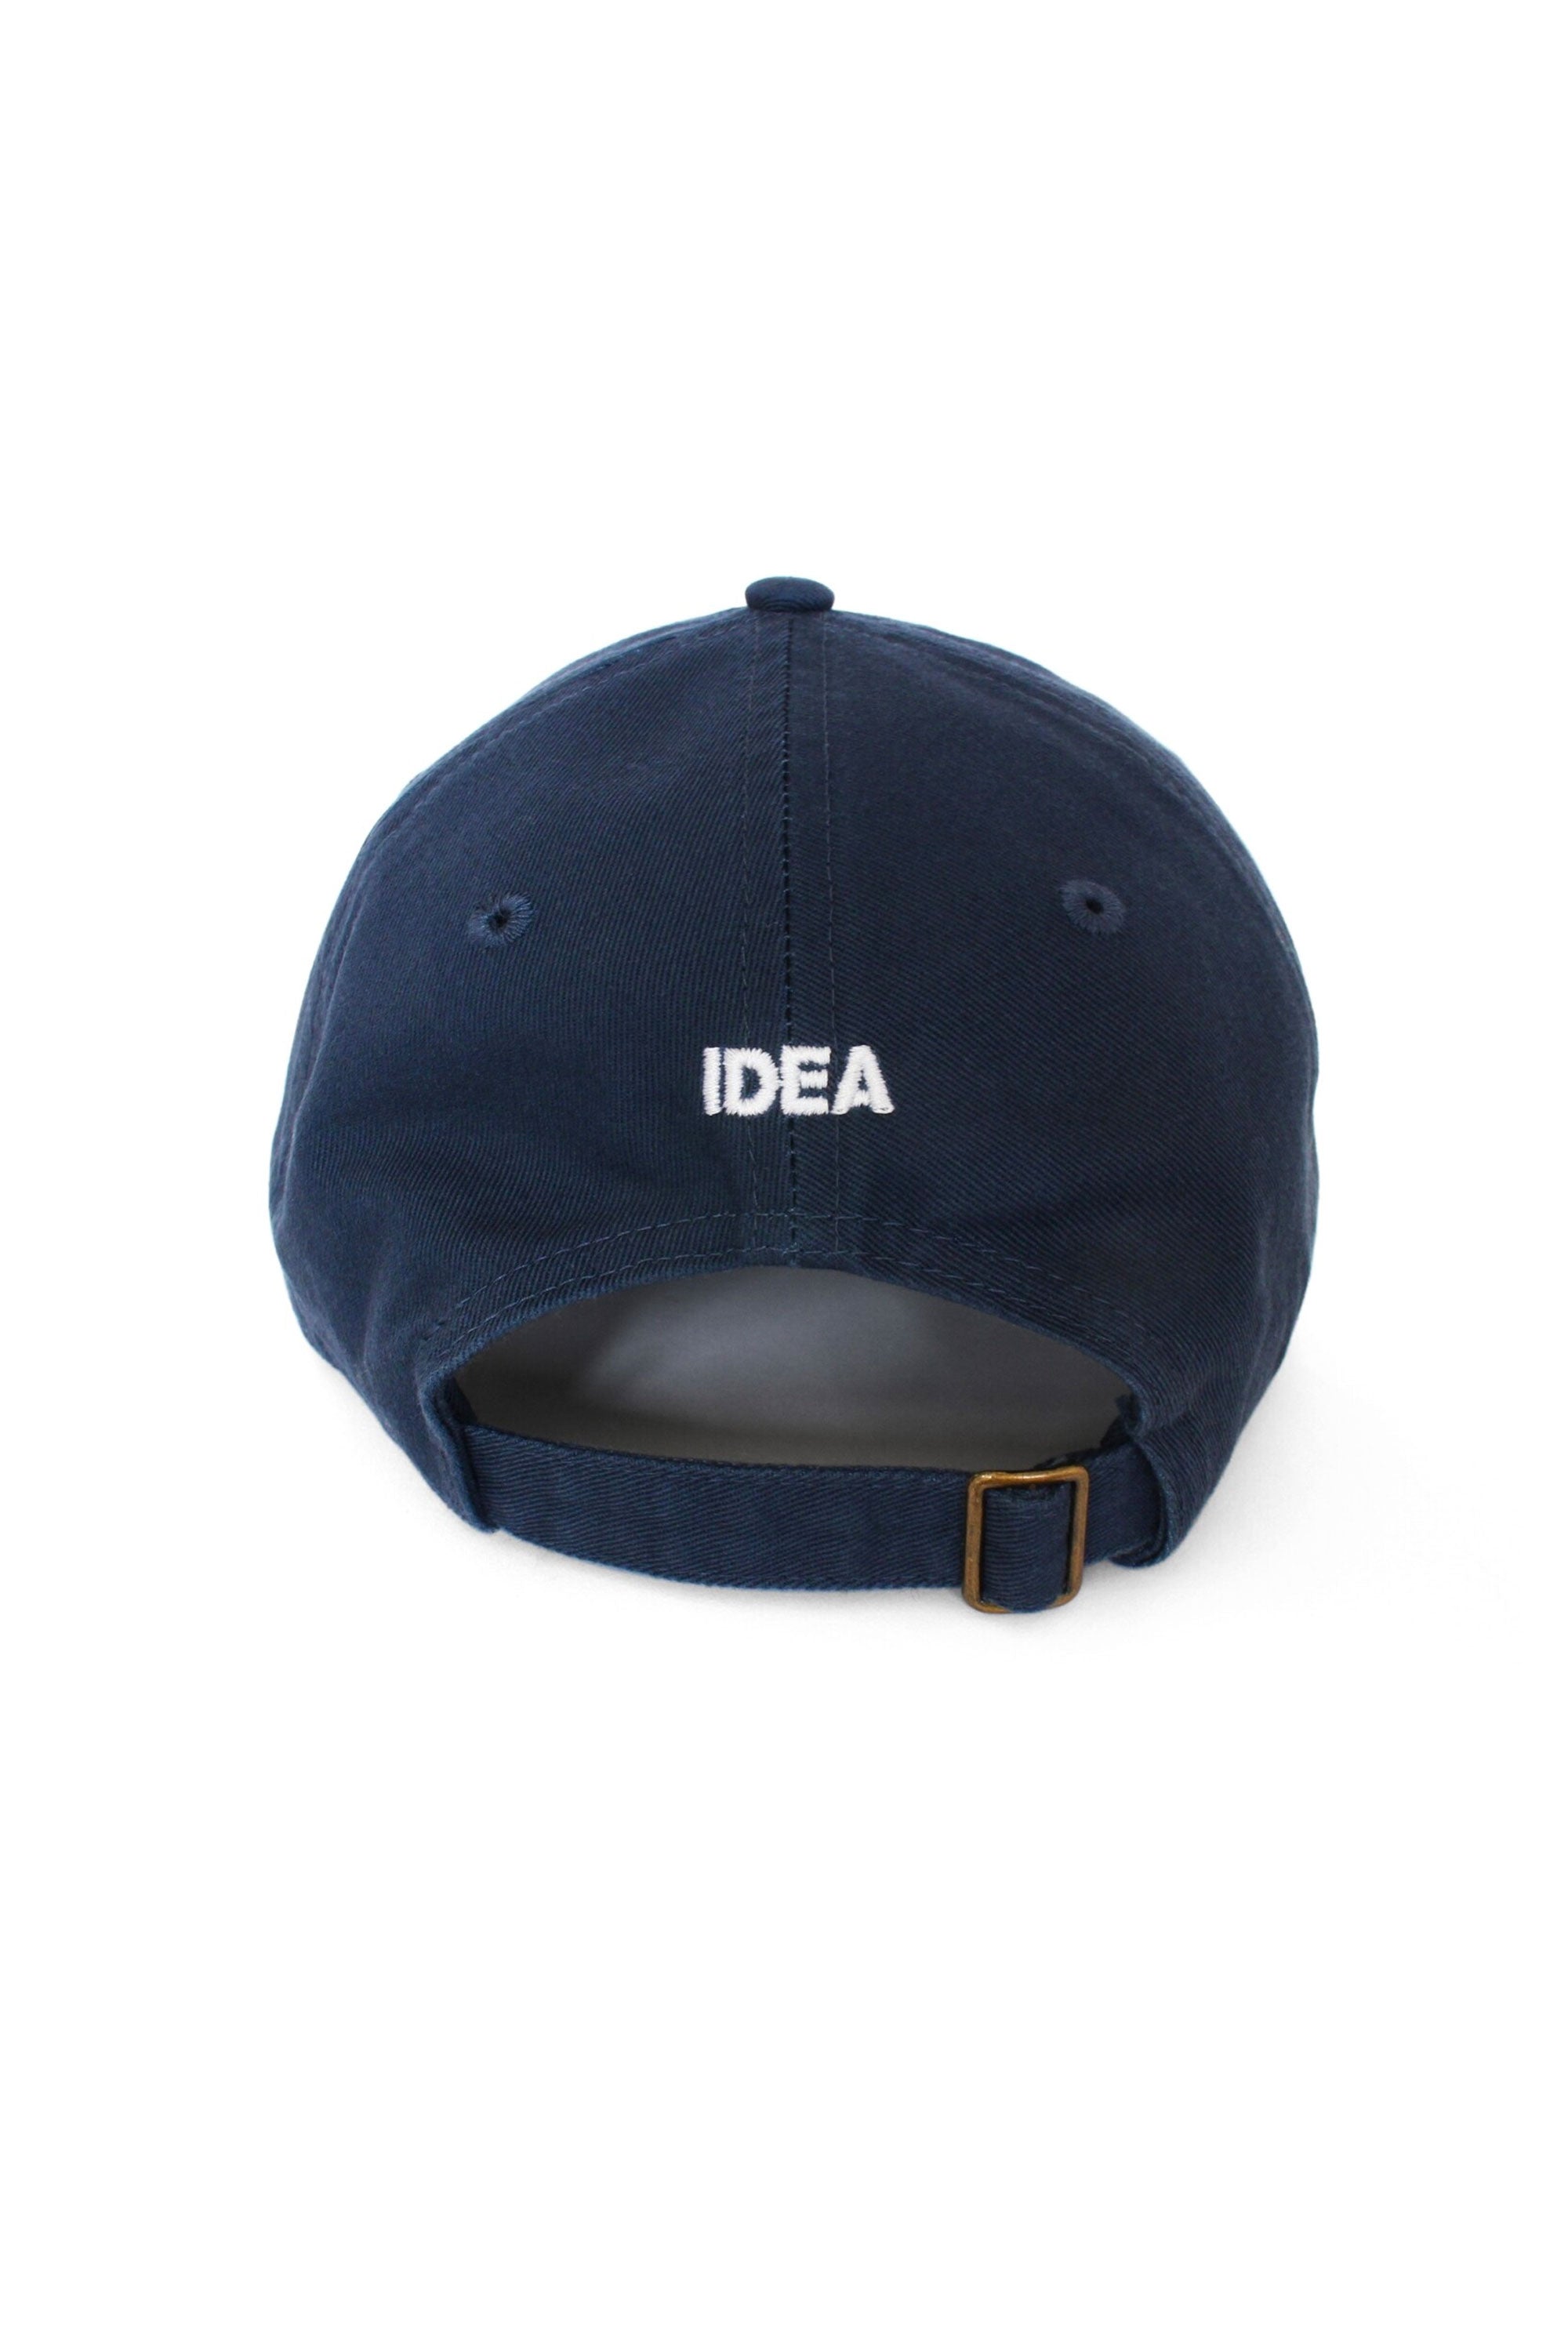 The IDEA - WINONA NAVY HAT  available online with global shipping, and in PAM Stores Melbourne and Sydney.